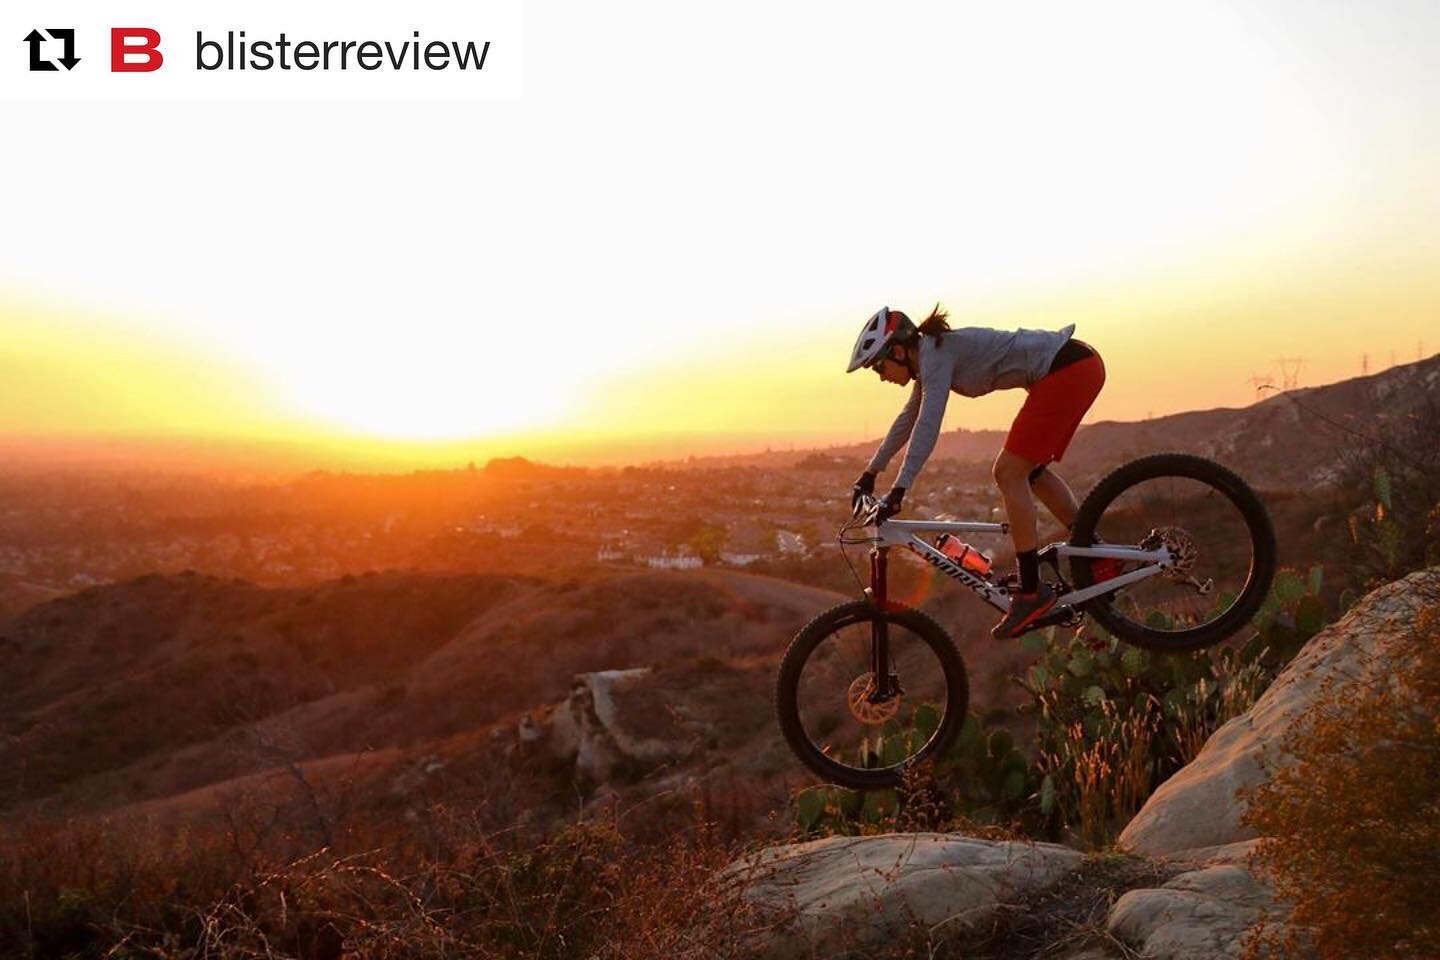 Hop over to @blisterreview to listen to a recent podcast I did with them! Fun times chatting about all kinds of things! 🙌
&bull;
#Repost @blisterreview
・・・@annekebeerten was born in the Netherlands, started racing BMX when she was 4, then became a 2